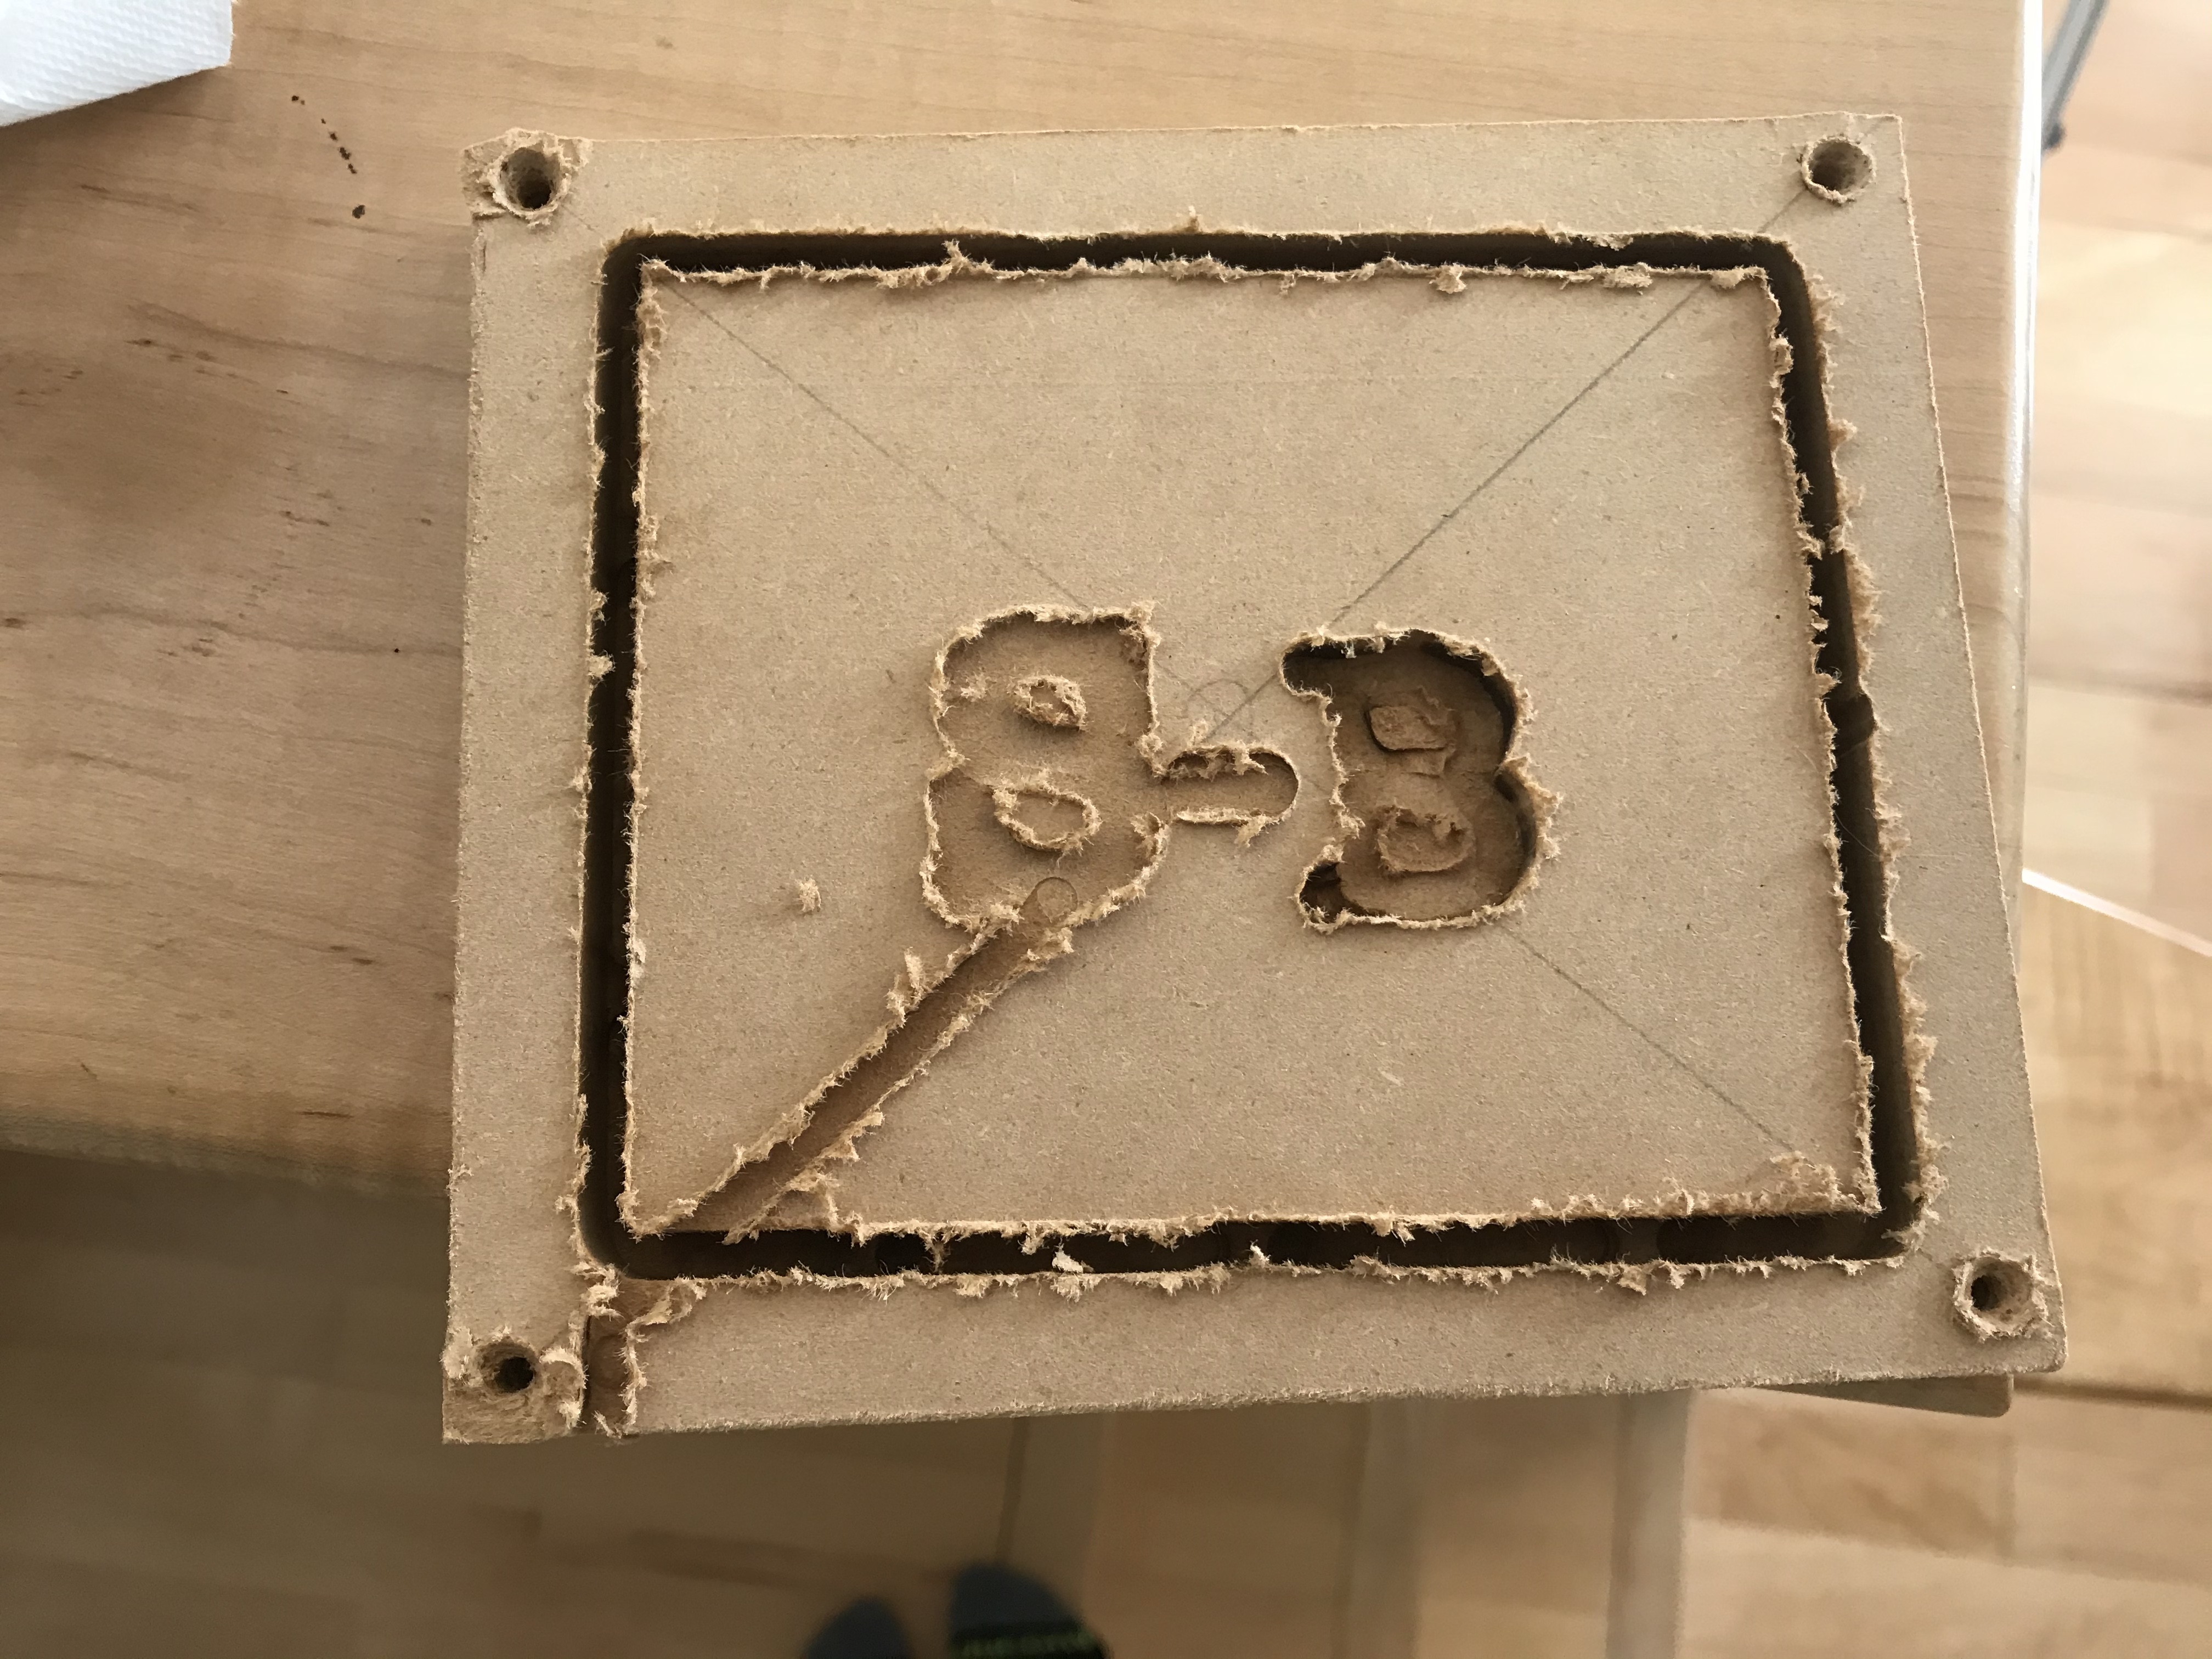 First Milling Test